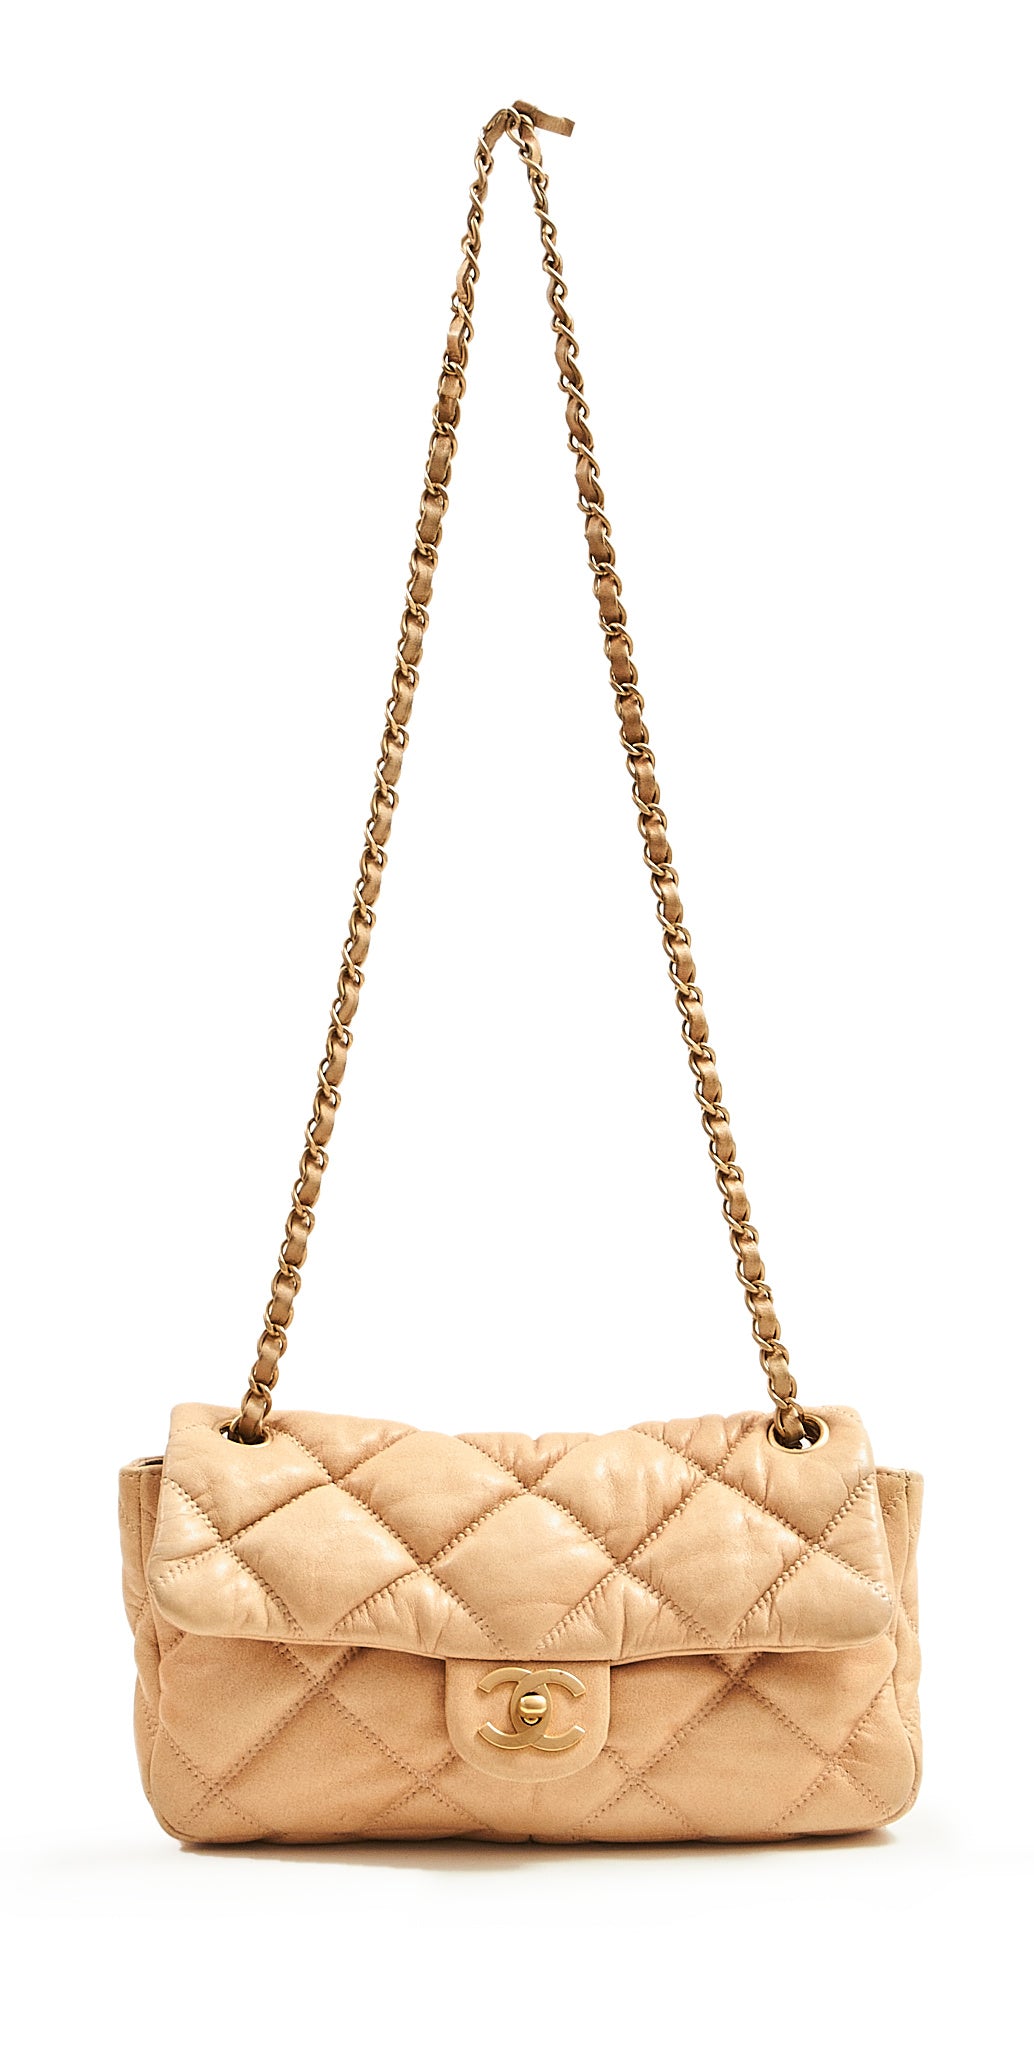 Chanel Beige Puffy Leather Shoulder Chain Flap Bag